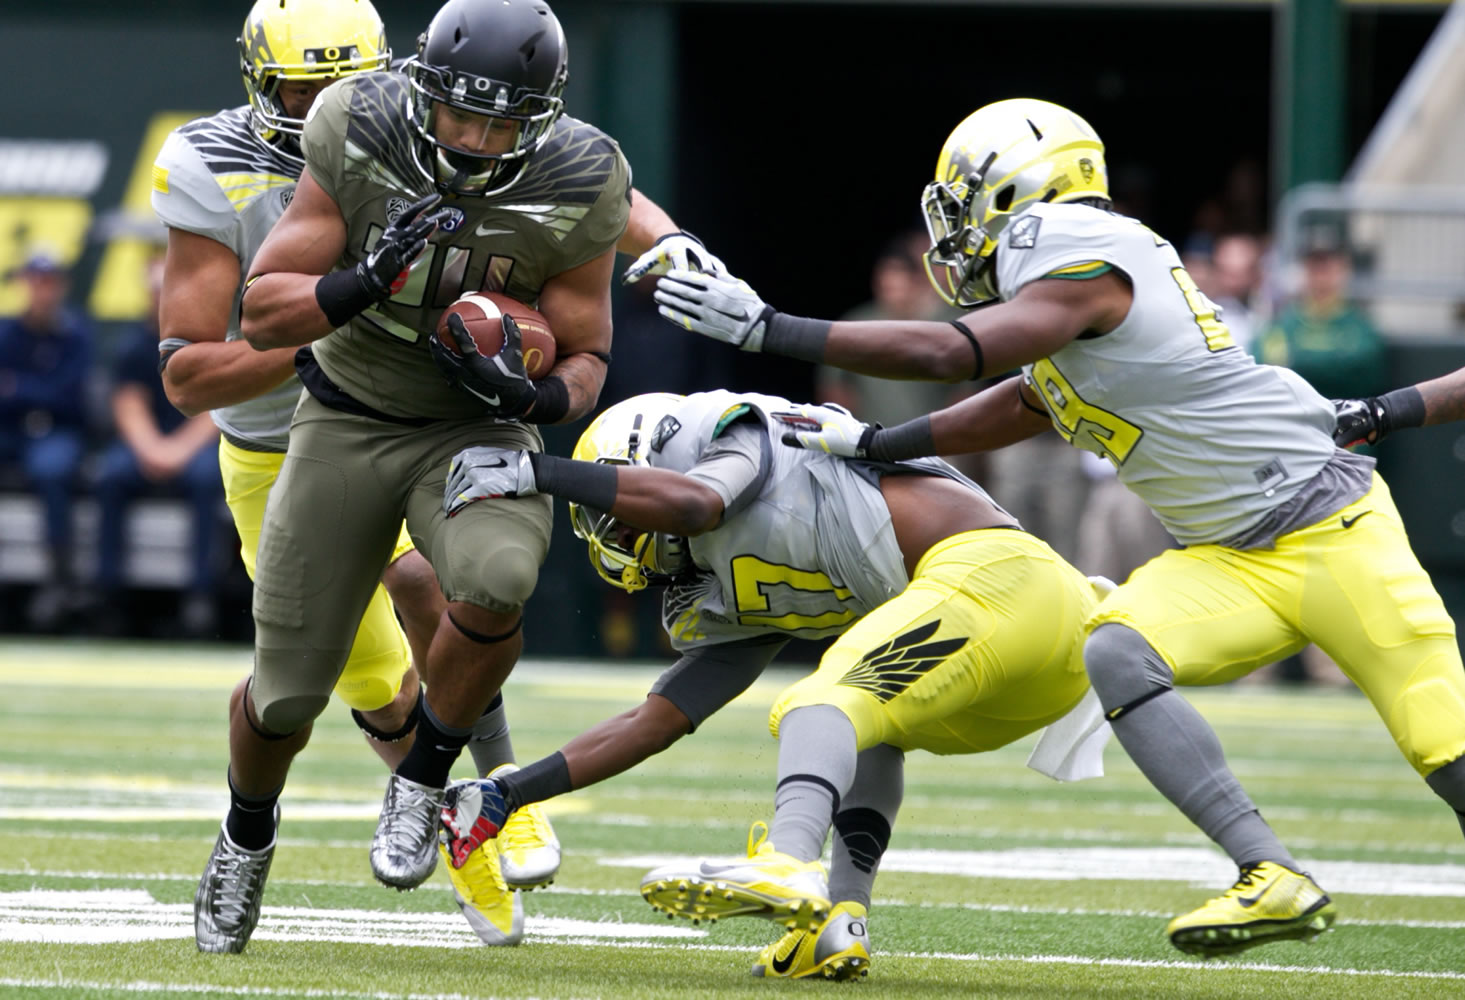 Thomas Tyner had 58 yards rushing and 26 yards receiving in Oregon's spring game, including a touchdown catch.